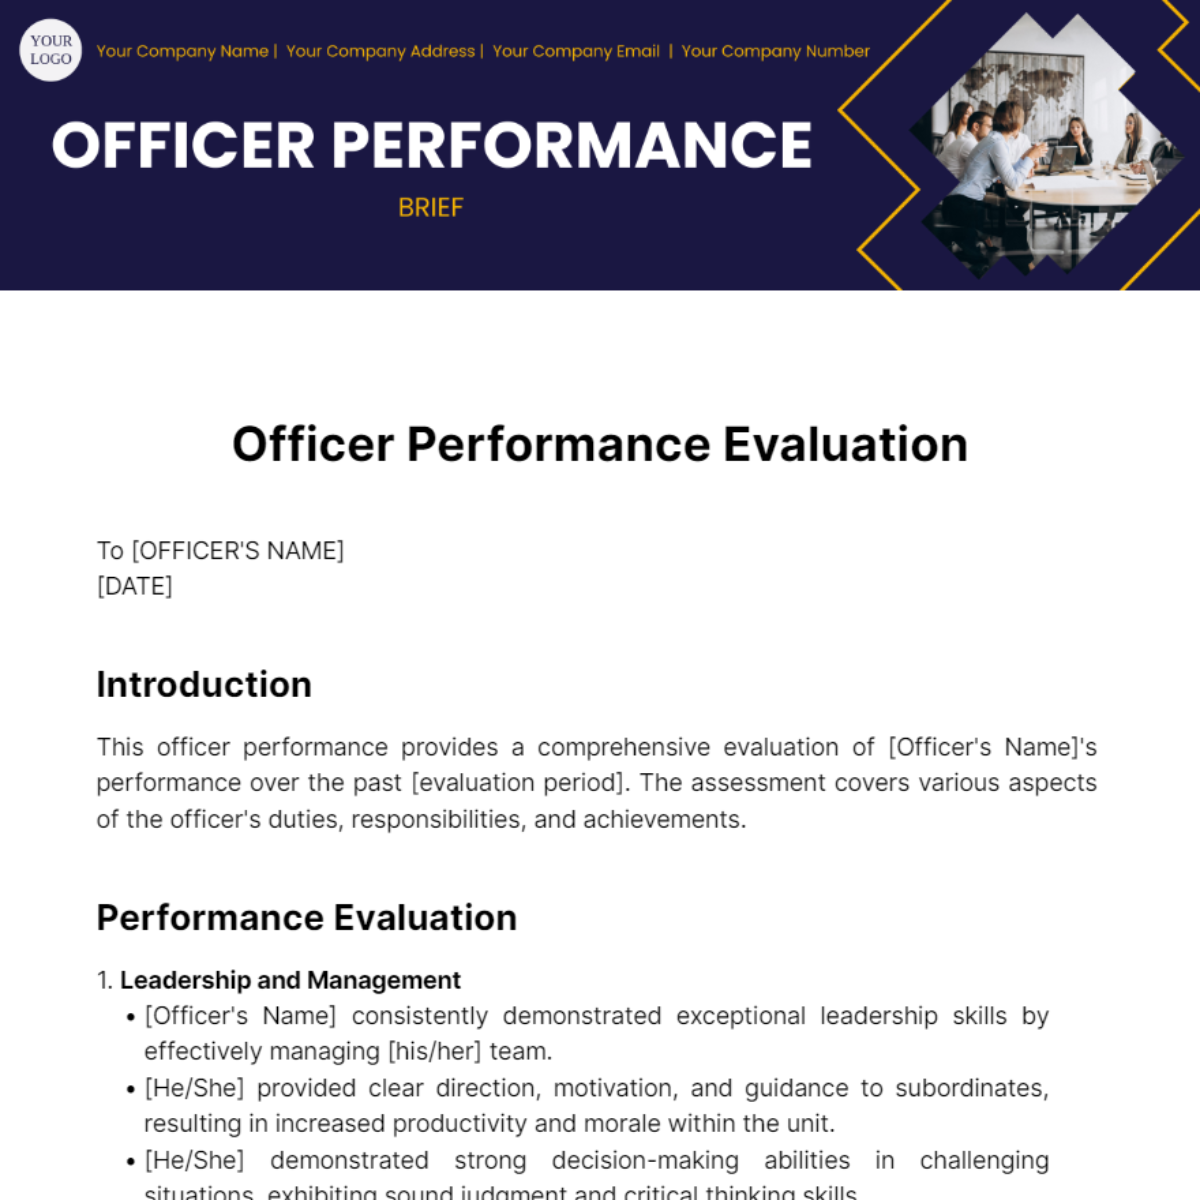 Officer Performance Brief Template